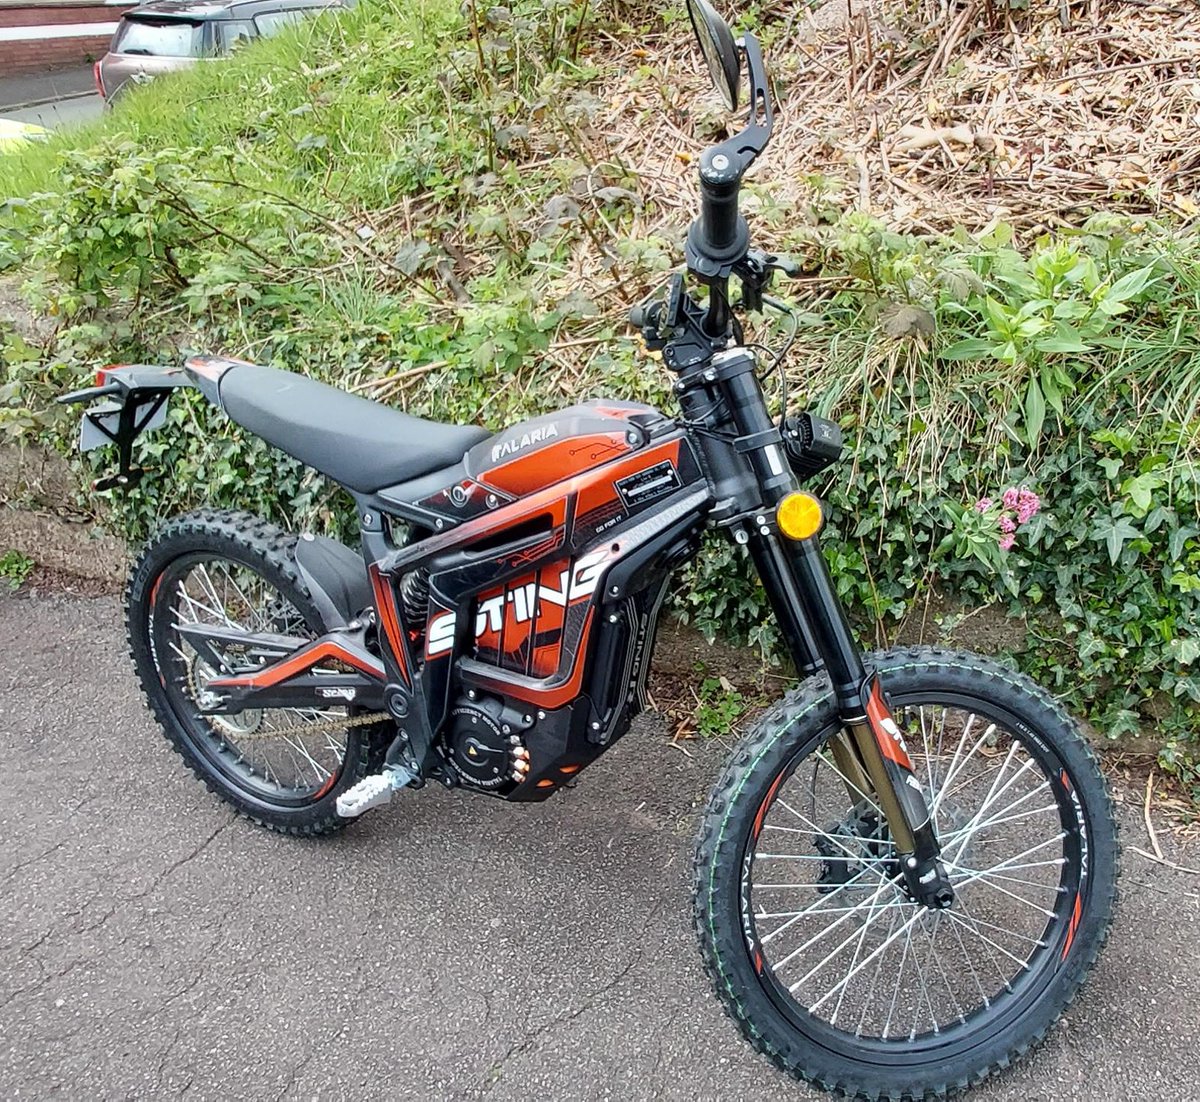 #MaindeeNPT CSOs sighted this Su-ron yesterday on Christchurch Road.
RPSO officers seized Bike 🏍️ 
Rider prosecuted for No Licence & No Insurance ❌  
Rider also breathalysed and prosecuted as he blew 3x over the limit ❌ 
@gpoperations 
#CO149 #CO491 #CO359 #Fatal5